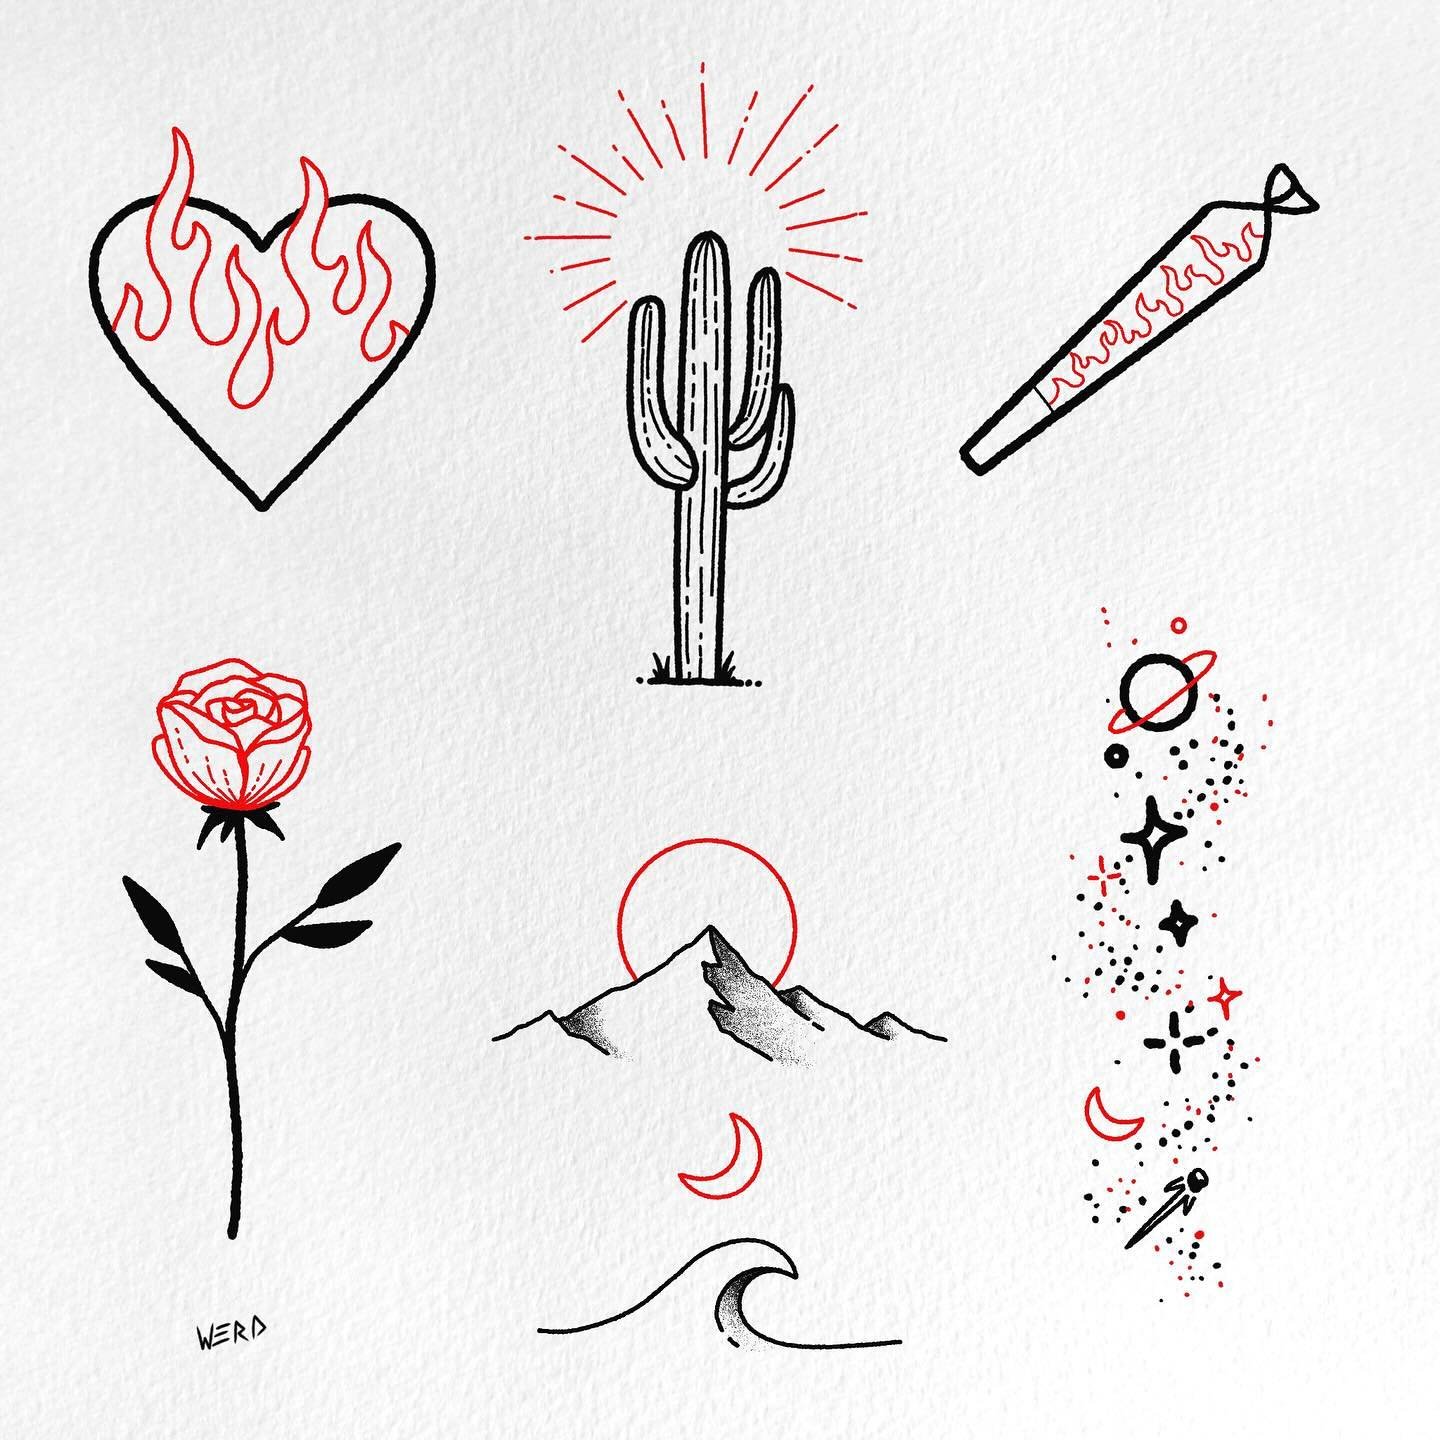 Black and Red Tattoo Designs. 
.
.
.
.
If you would like to use any of my designs for a tattoo, please support my work and purchase a Tattoo Certificate from my website. Use the product like on the post or link in my bio. Thanks so much! 
-Drew
.
.
.